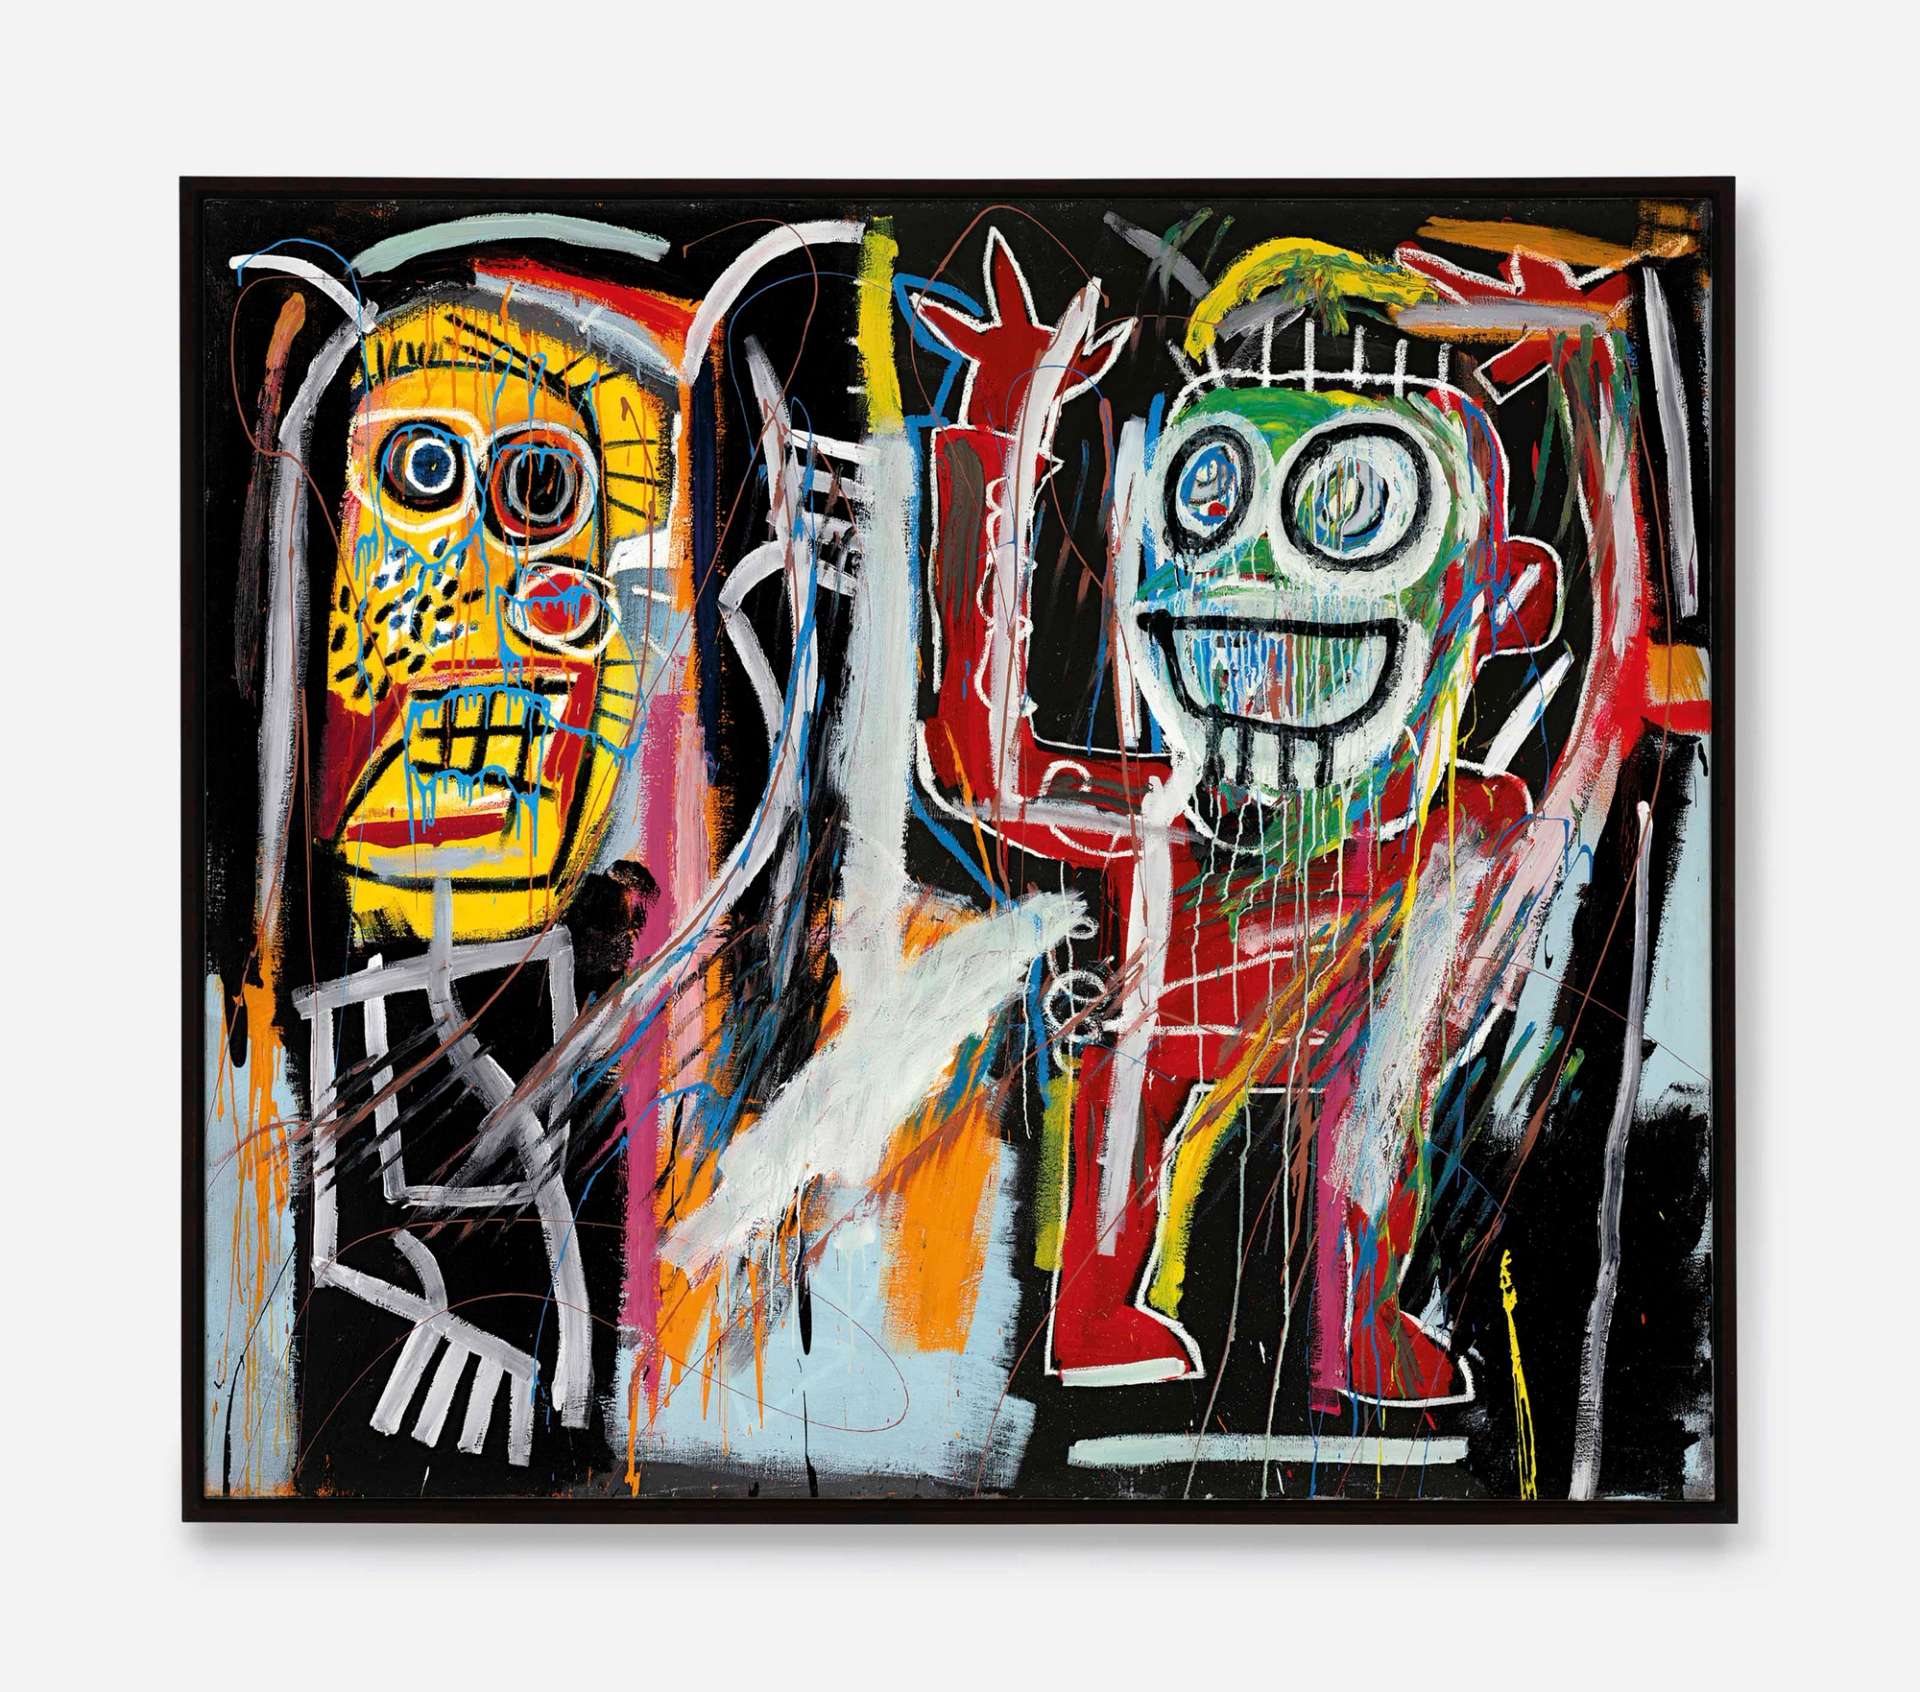 An image of Jean-Michel Basquiat’s Dustheads, showing two figures in his characteristic style. One of them is rendered in red, and raises its arms. The other one has a yellow face. Both figures display wide eyes and grins.